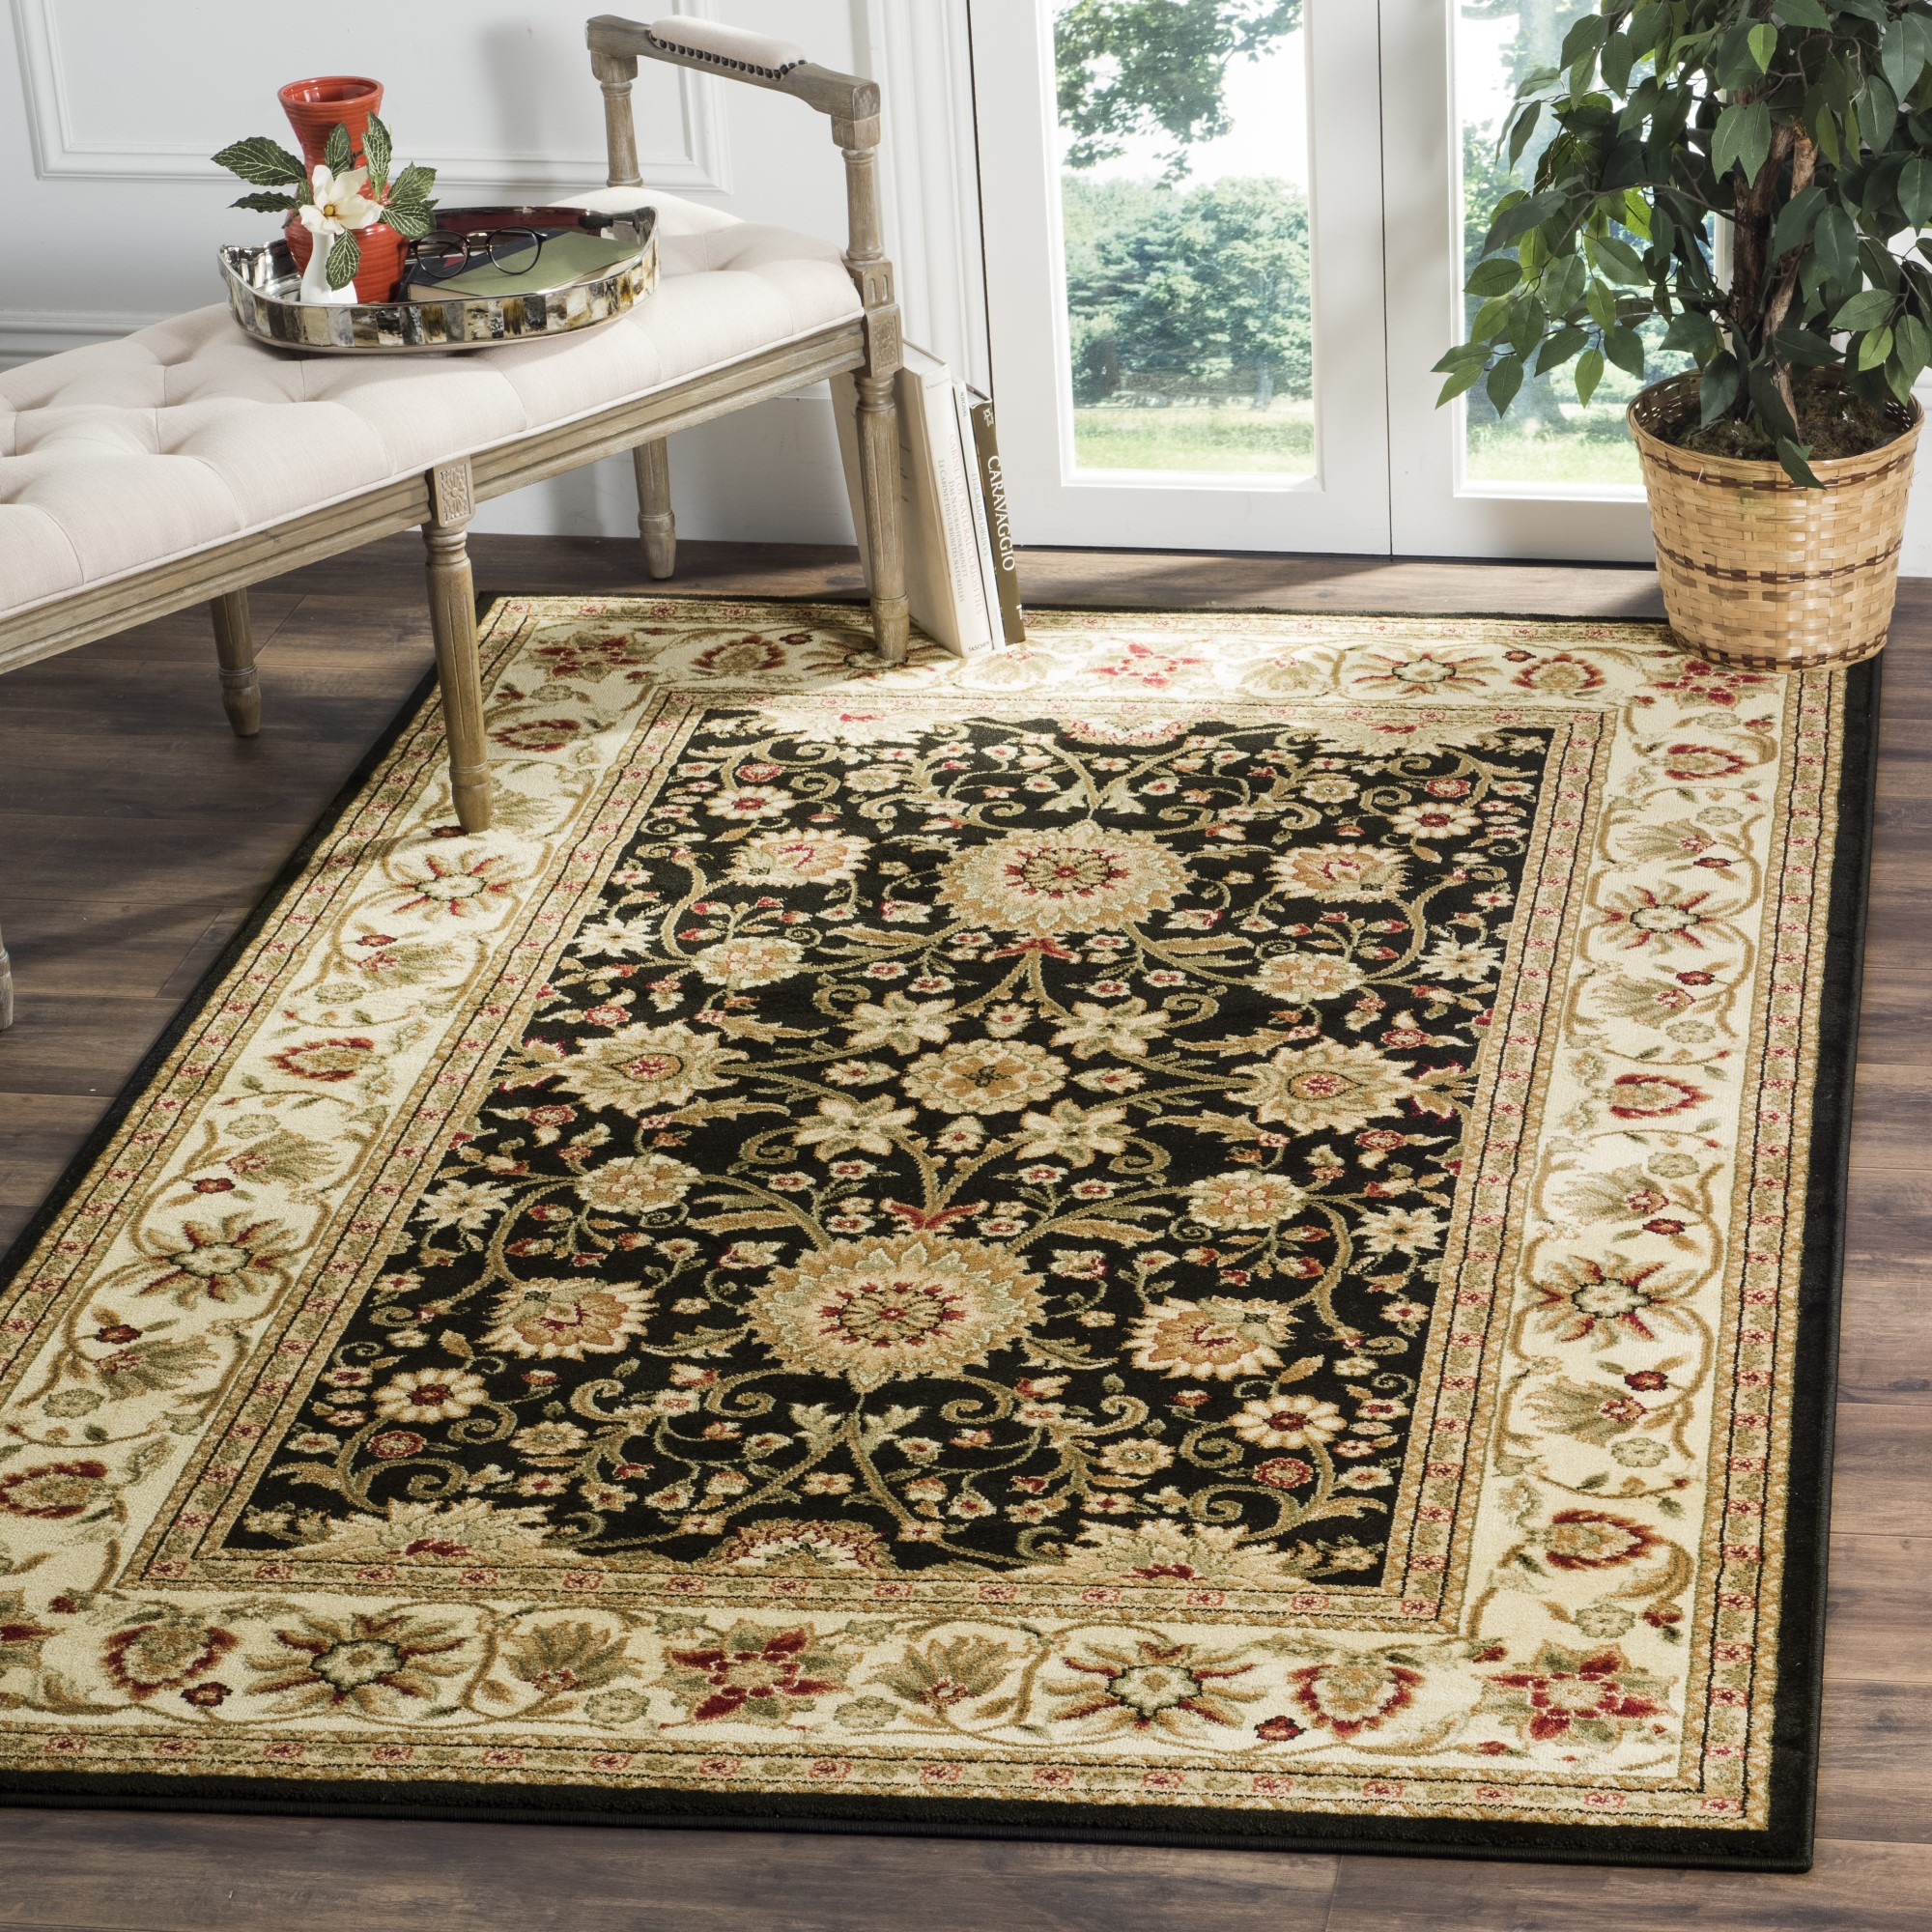 Safavieh Lyndhurst Collection LNH221G Traditional Oriental Non-Shedding Dining Room Entryway Foyer Living Room Bedroom Area Rug 5'3 x 5'3 Round Grey Multi 